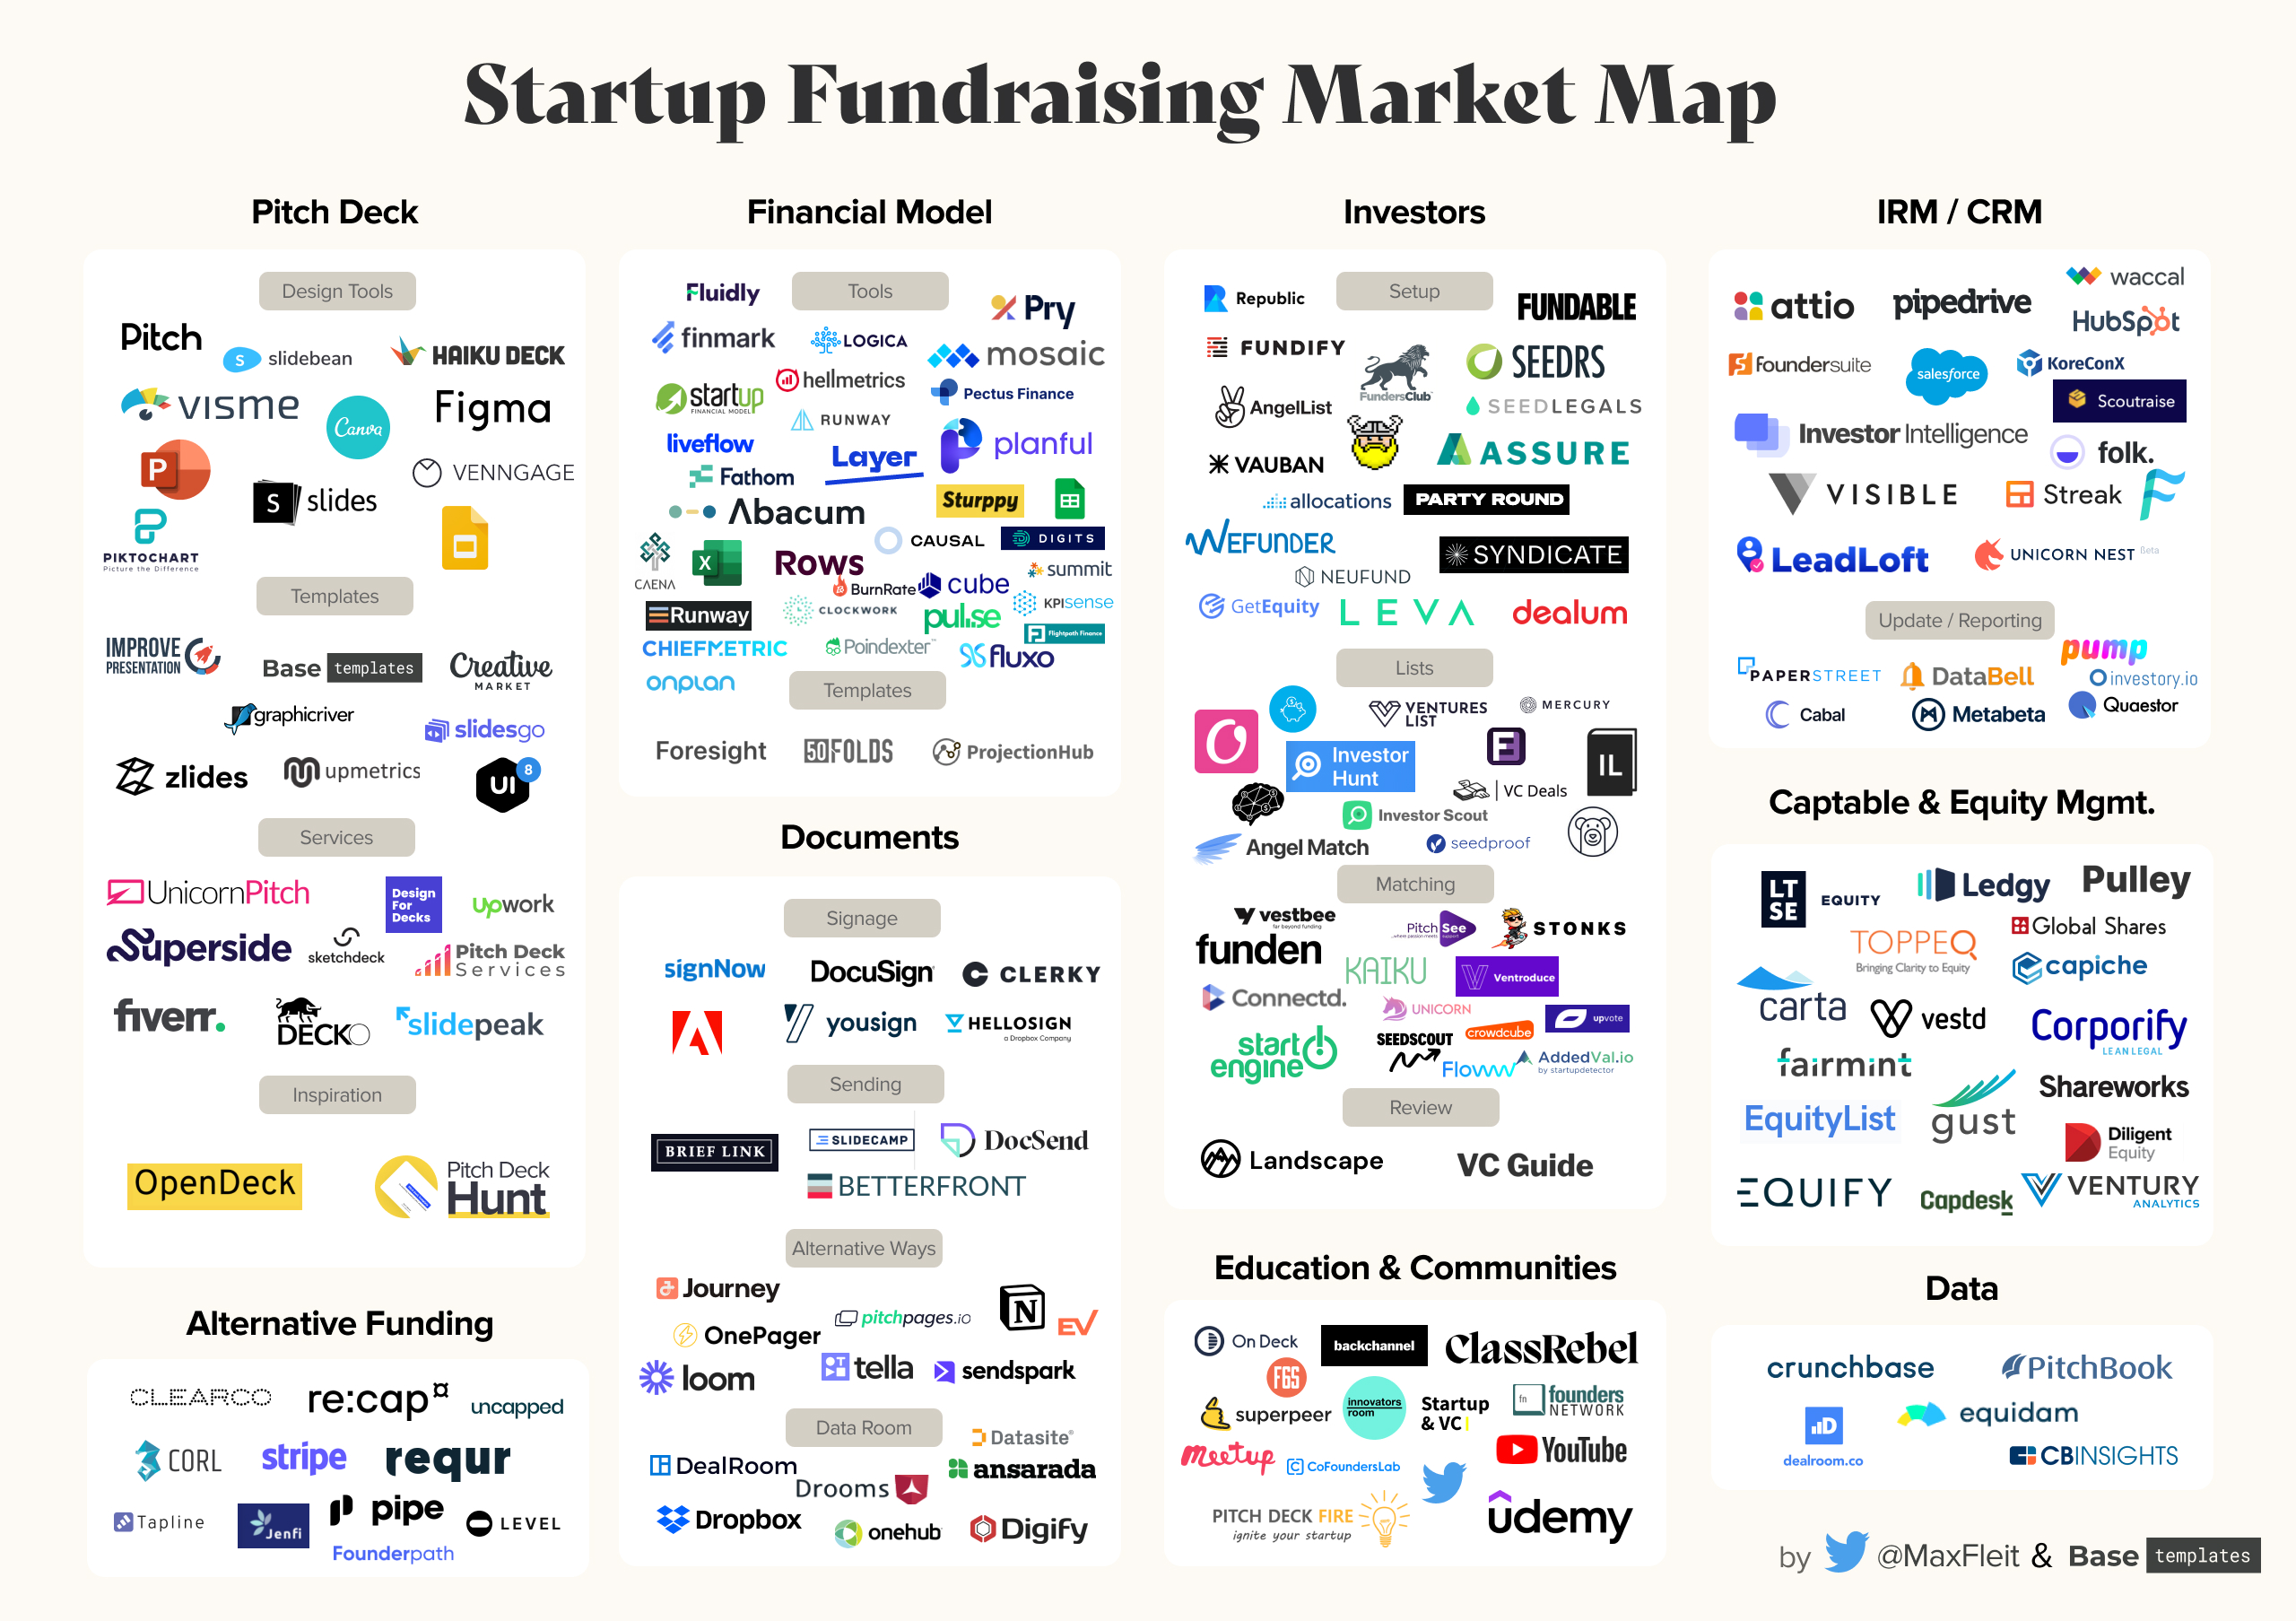 Graphic Overview of all Companies in the fundraising space